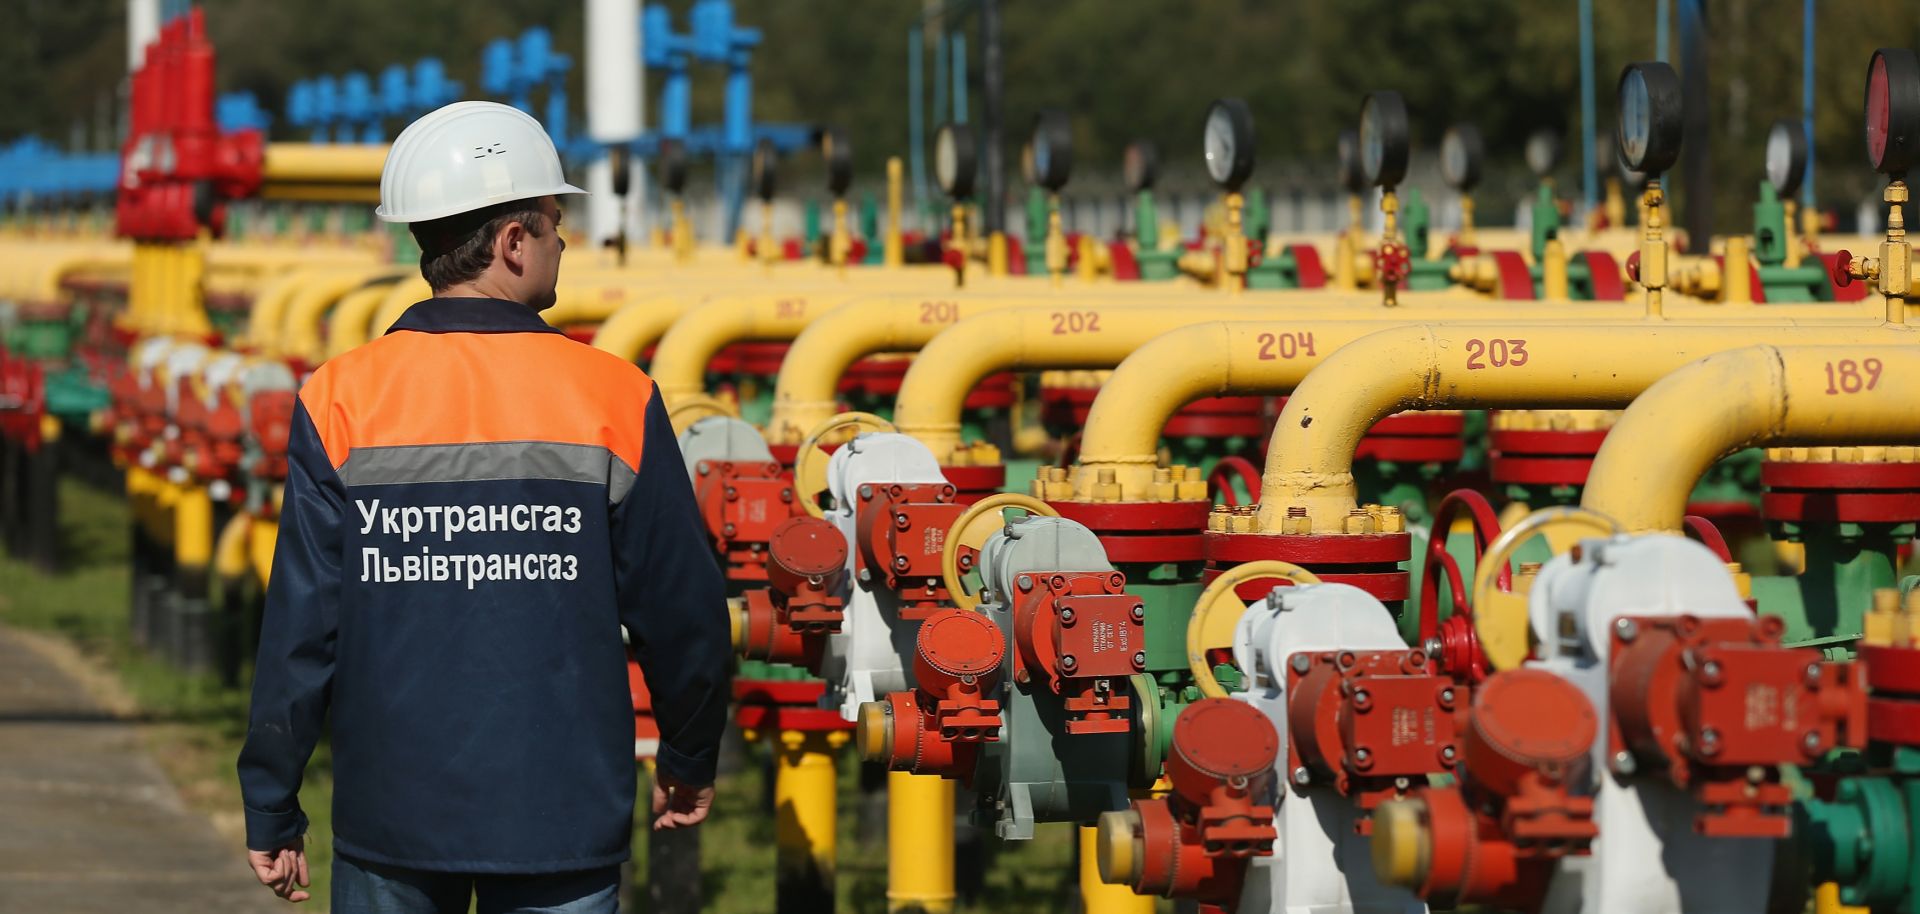 A worker walks among pipes and valves at the Dashava natural gas facility on September 18, 2014 in Dashava, Ukraine.